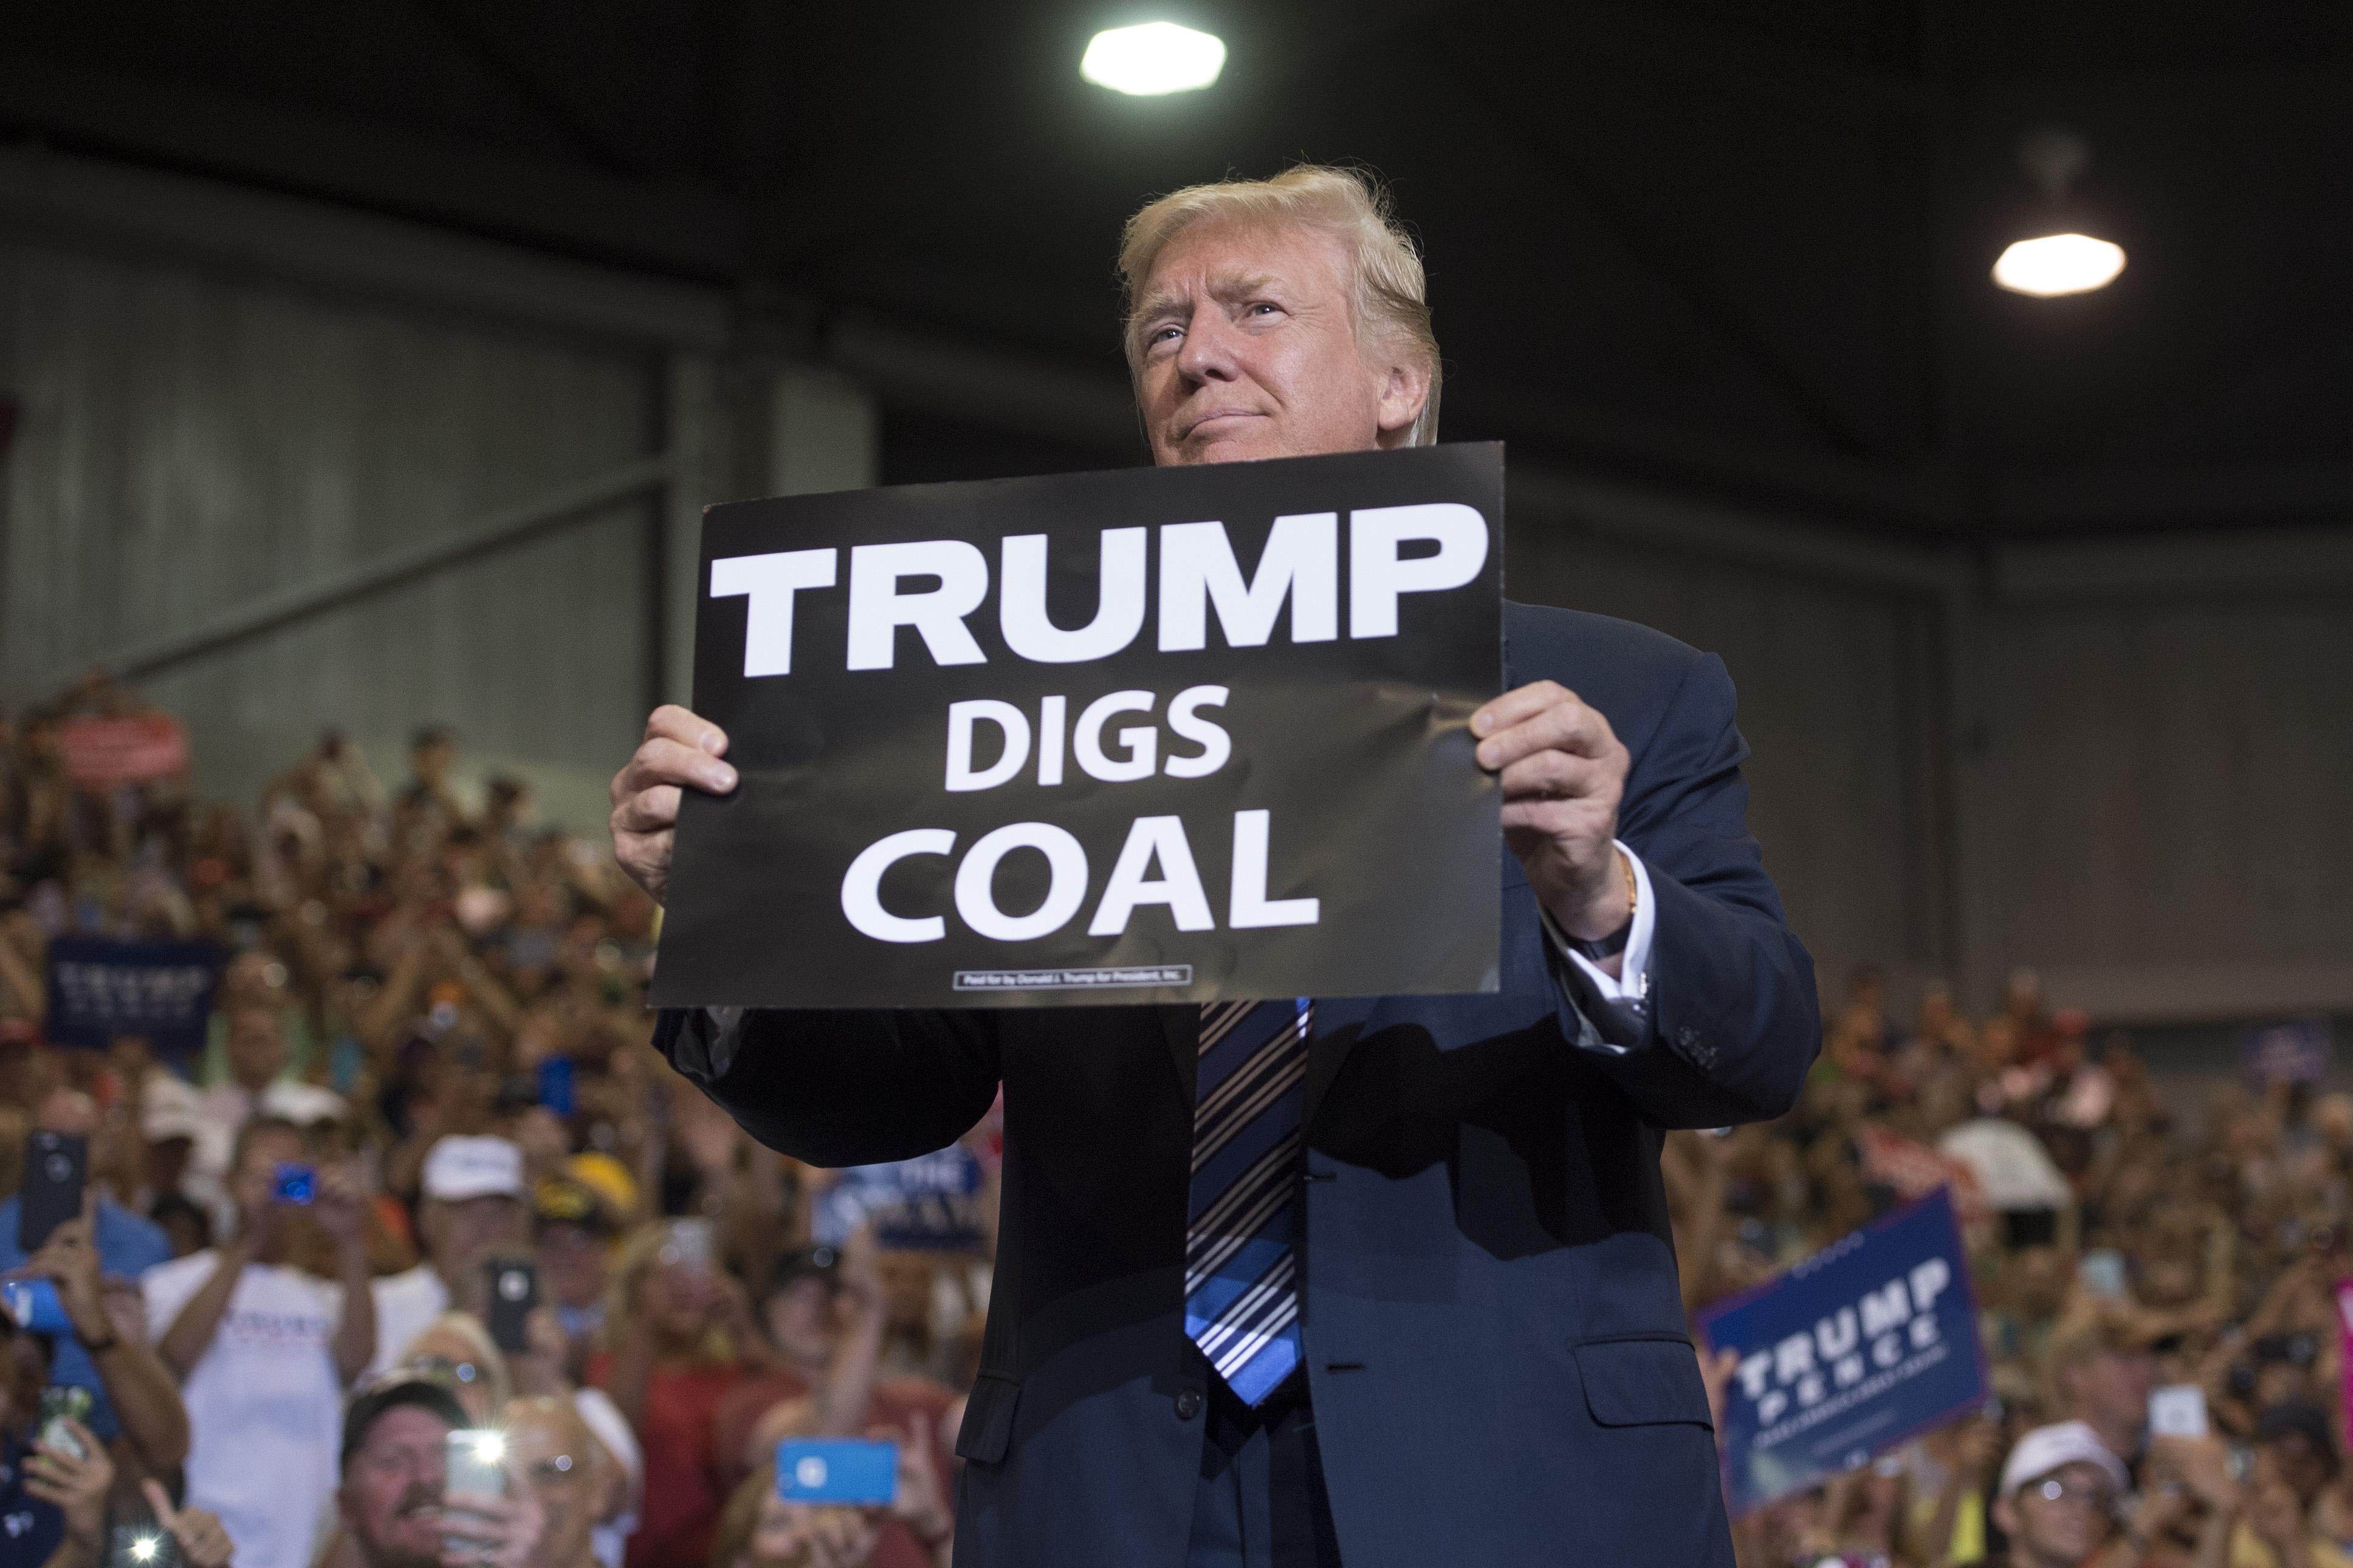 President Donald Trump holds up a “Trump Digs Coal” sign as he arrives to speak during a Make America Great Again Rally at Big Sandy Superstore Arena in Huntington, West Virginia, Aug. 3.